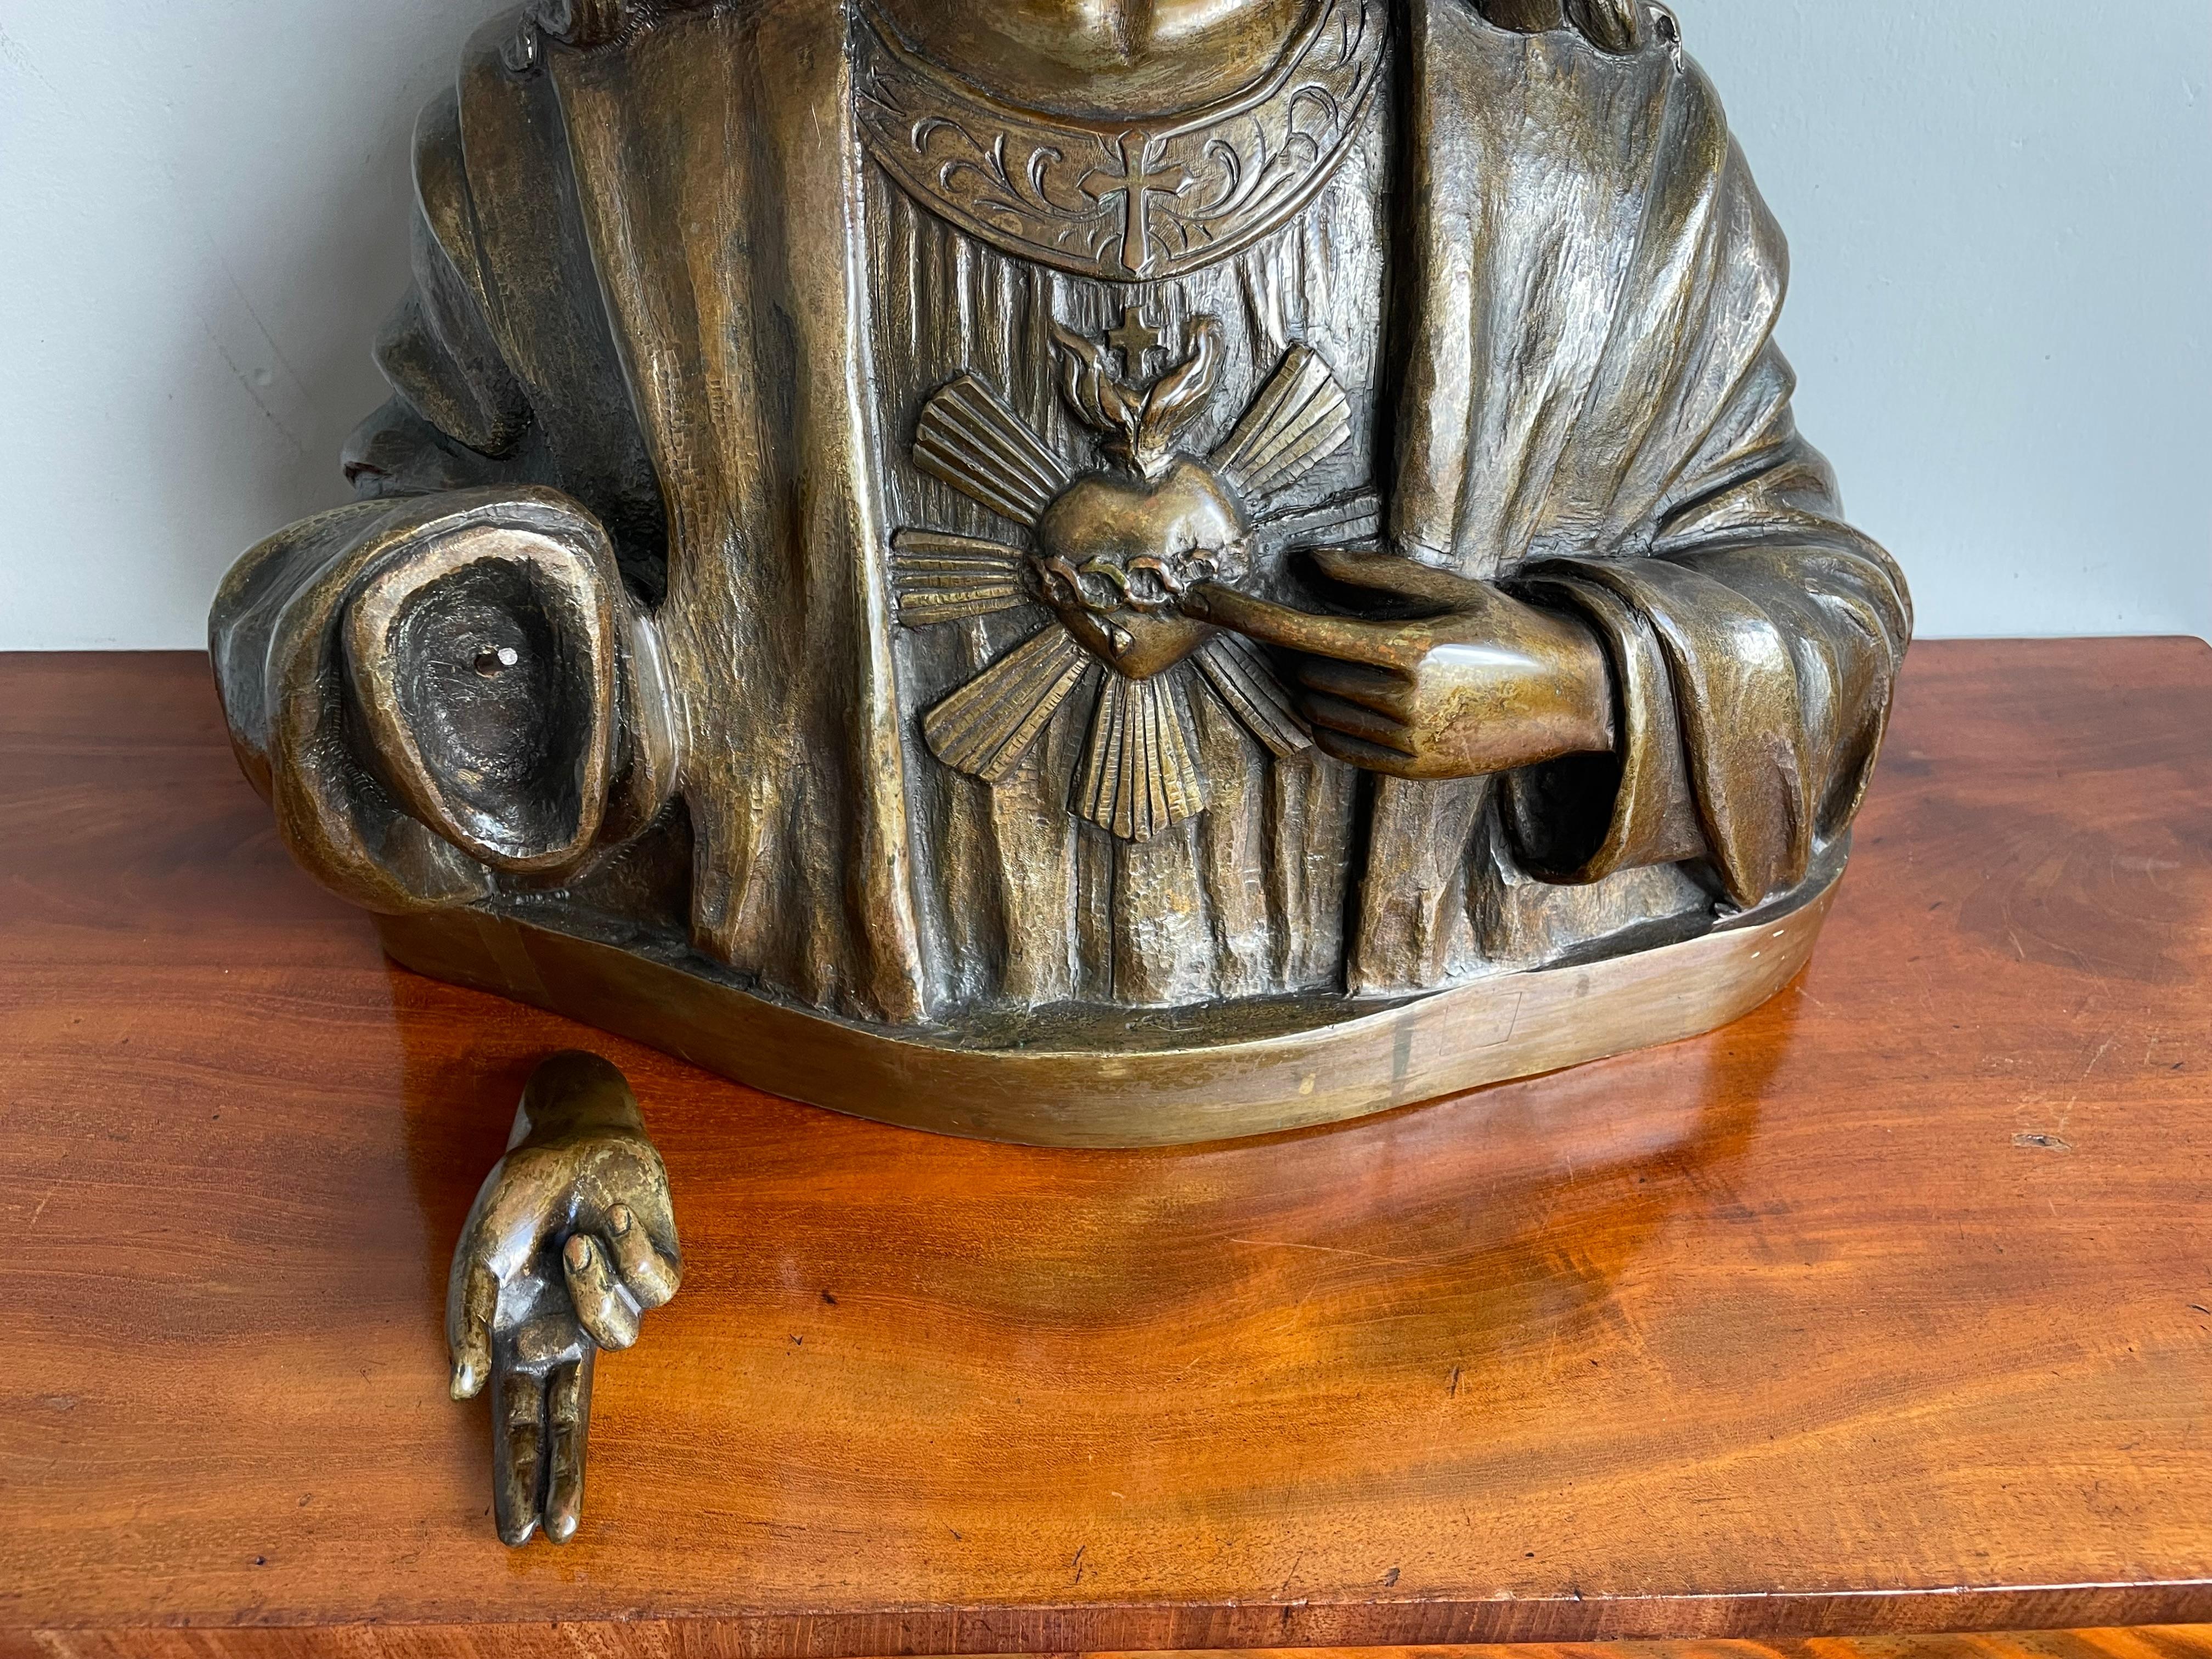 Rare Antique Bronze Holy Heart Sculpture / Bust of Our Lord Jesus Christ 1920 For Sale 3